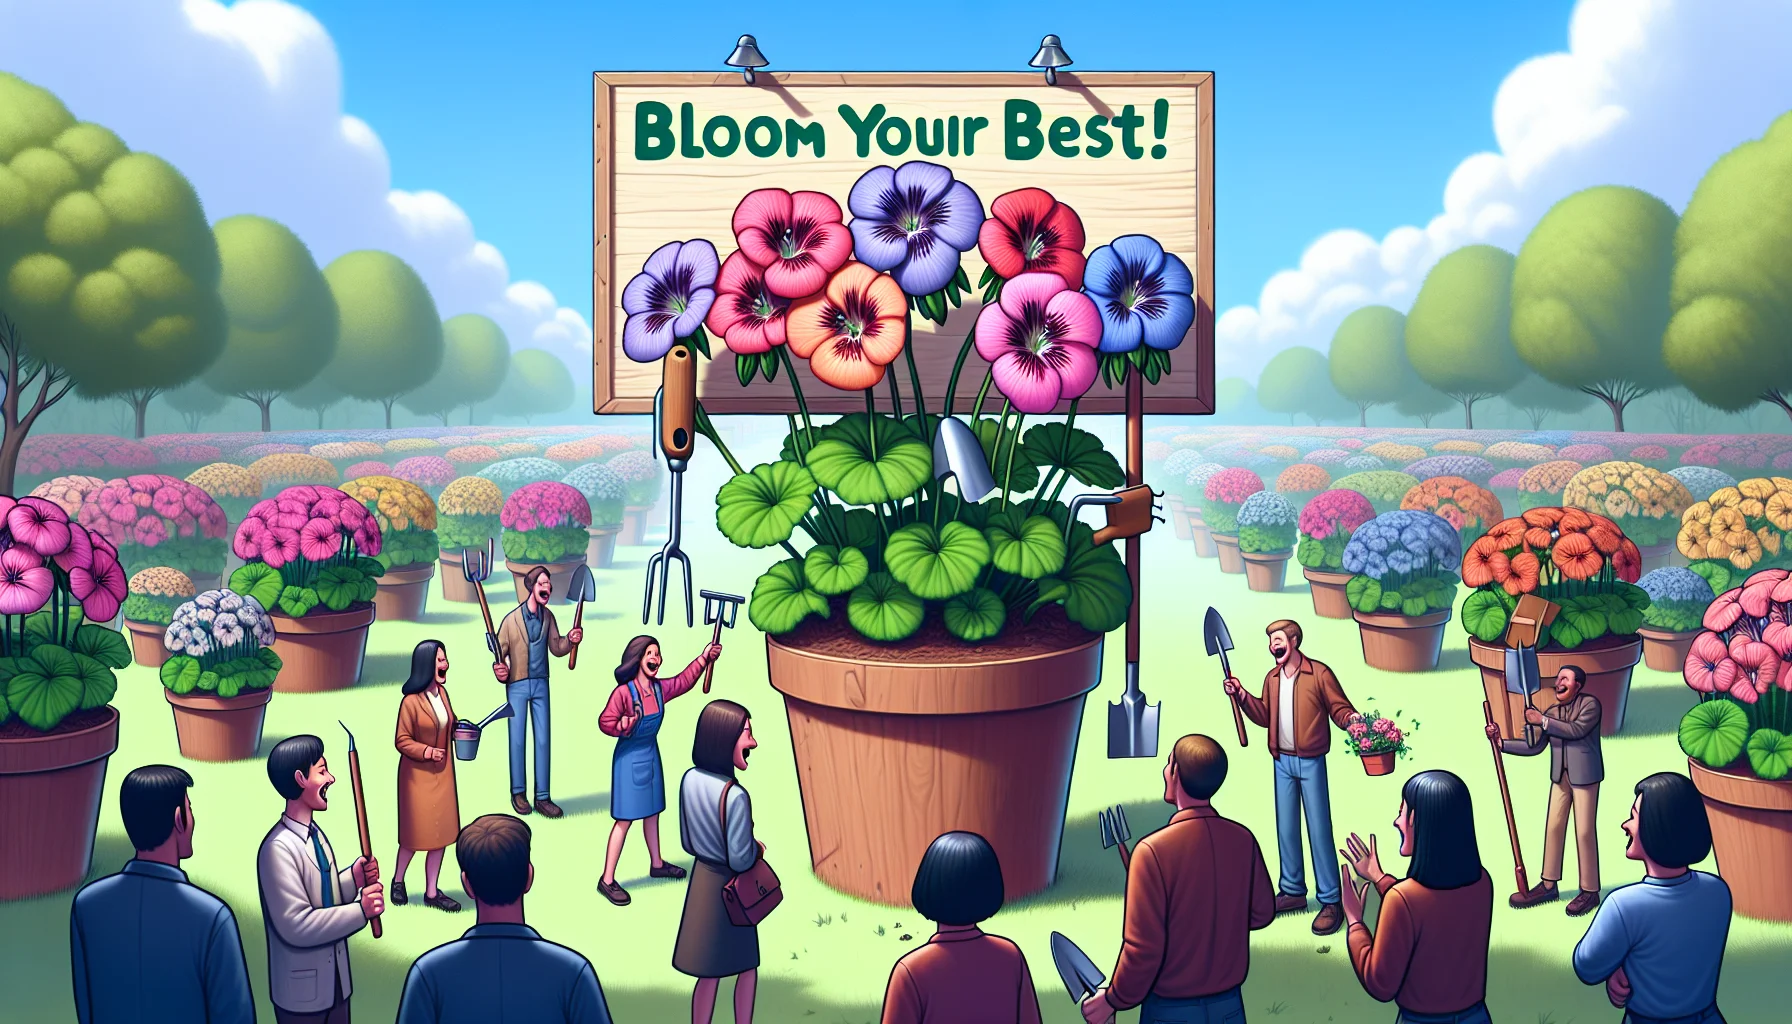 Generate an amusing, realistic scene featuring cranesbill (geranium) flowers. The colorful, blooming cranesbill flowers are participating in an imaginary gardening competition with tools in their leaves, under a sunny, blue sky with fluffy clouds. In the foreground, a light-hearted sign reads 'Bloom Your Best!' with cranesbill flowers seemingly popping out from the letter 'o' in bloom, embodying fun and enthusiasm for gardening. The scene encourages people from diverse descents - East Asian, Hispanic, White, Black - of different genders, laughing and engaging in friendly competition in the background.